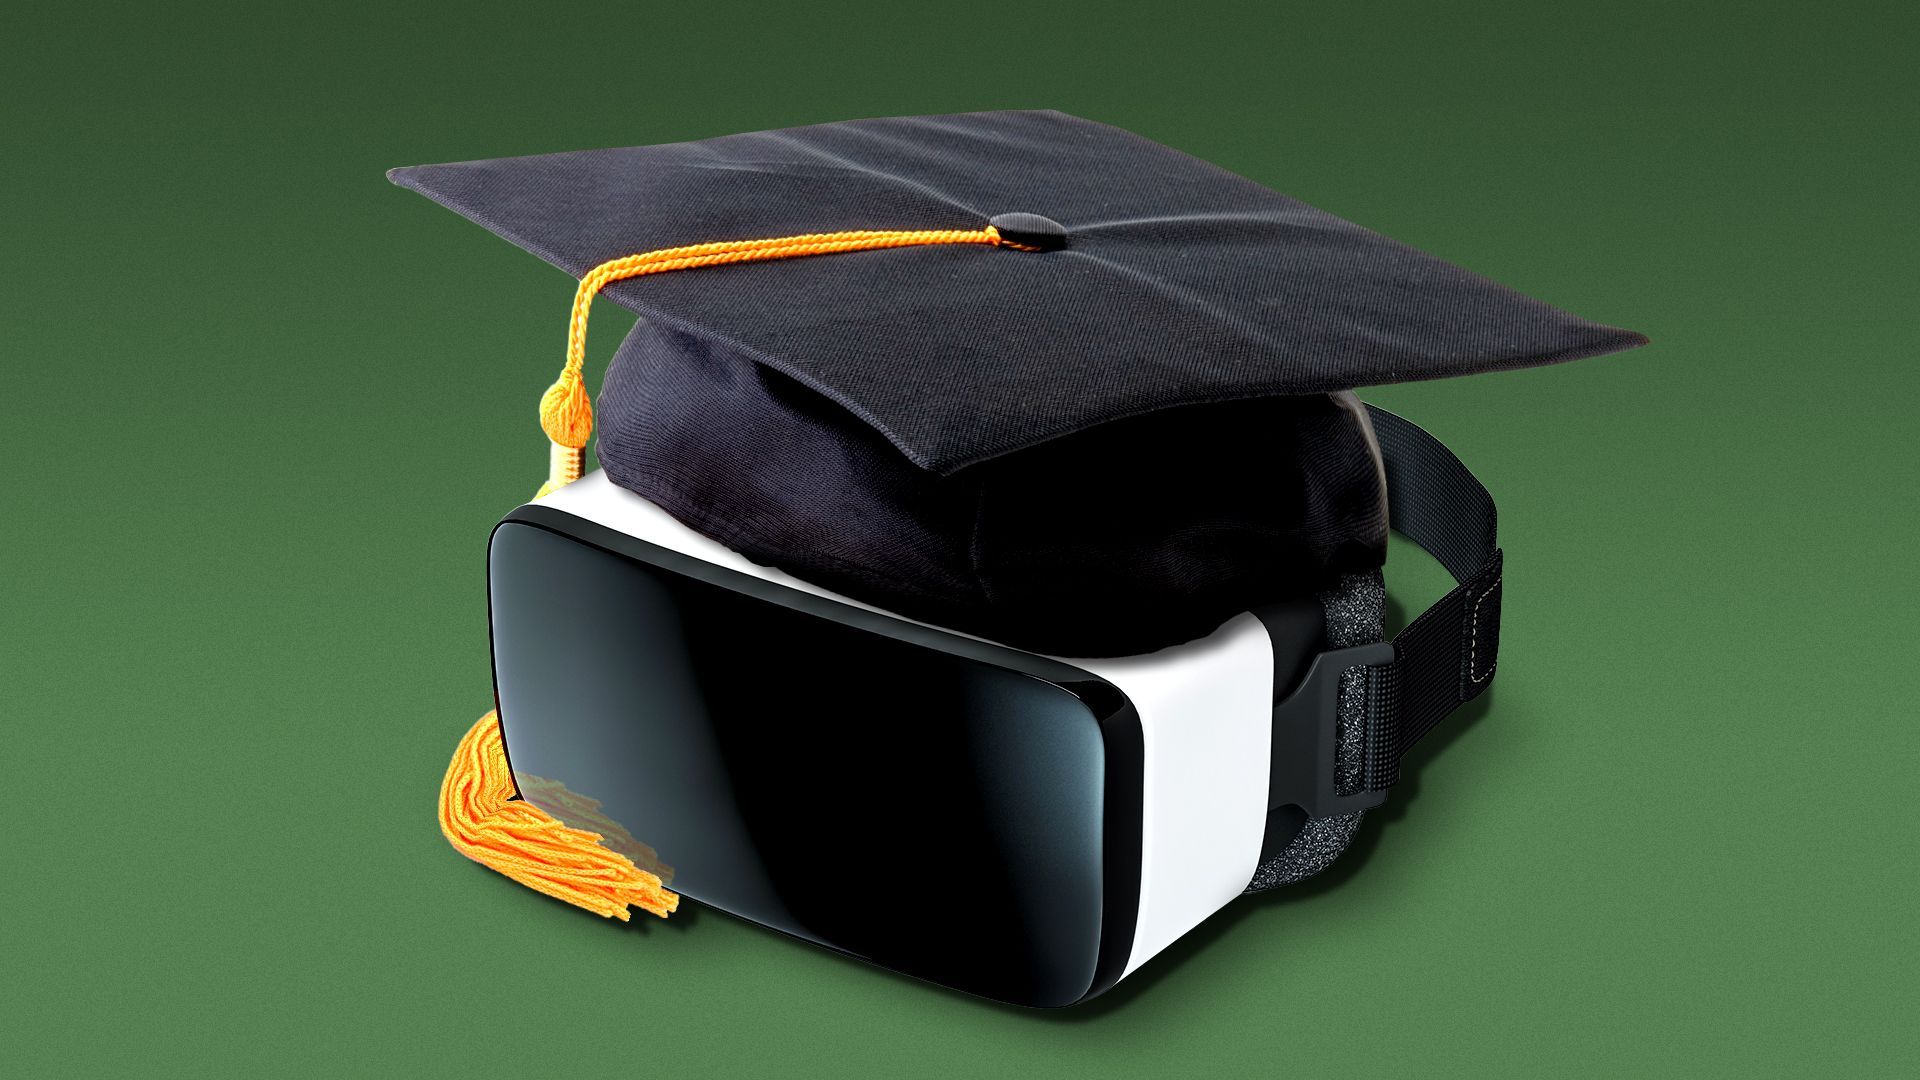 Illustration of a VR headset with a graduation cap resting on top